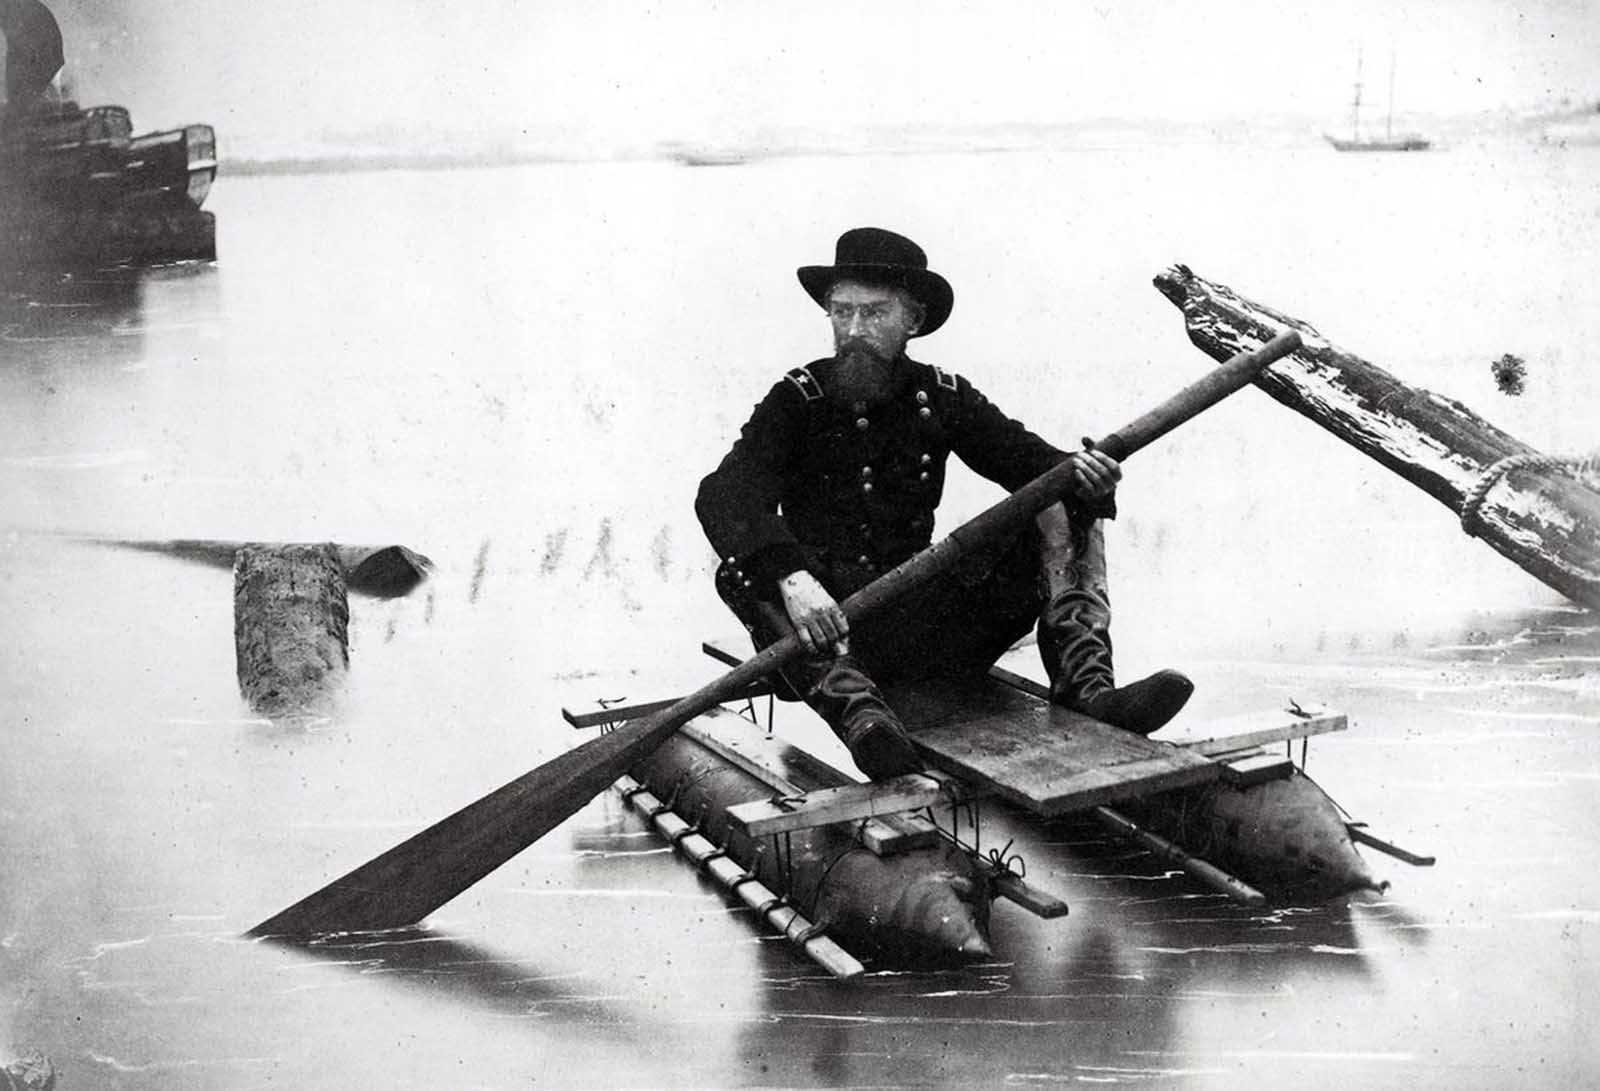 Union General Herman Haupt, a civil engineer, moves across the Potomac River in a one-man pontoon boat that he invented for scouting and bridge inspection in an image taken between 1860 and 1865. Haupt, an 1835 graduate of West Point, was chief of construction and transportation of U.S. military railroads during the war.